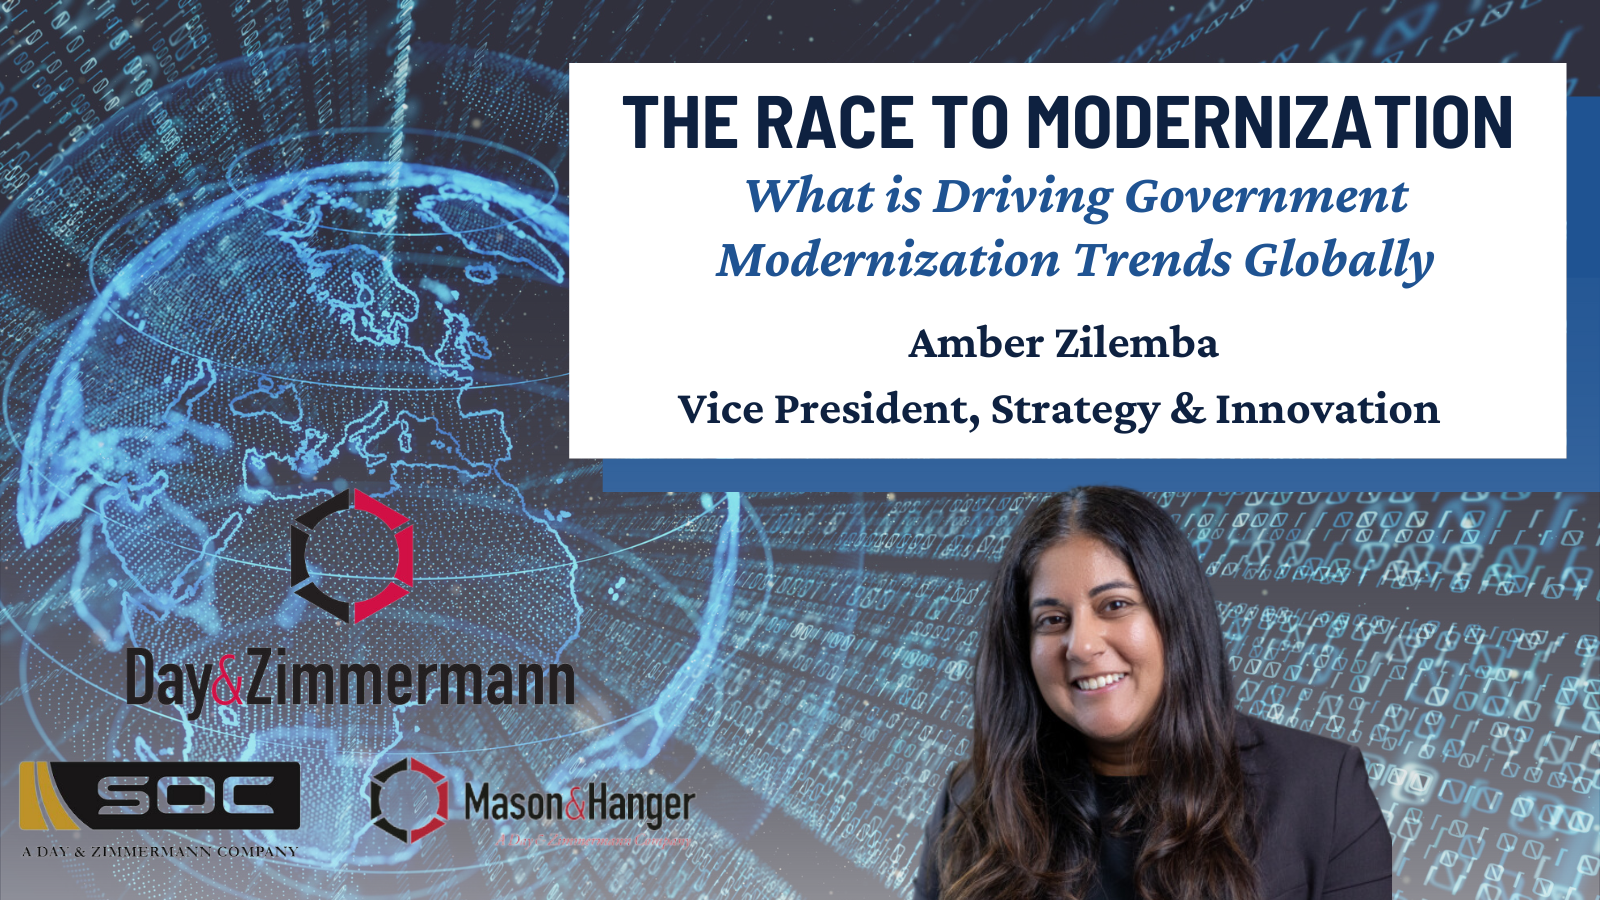 Video Series: The Race to Modernization - What is Driving Government Modernization Trends Globally featured image